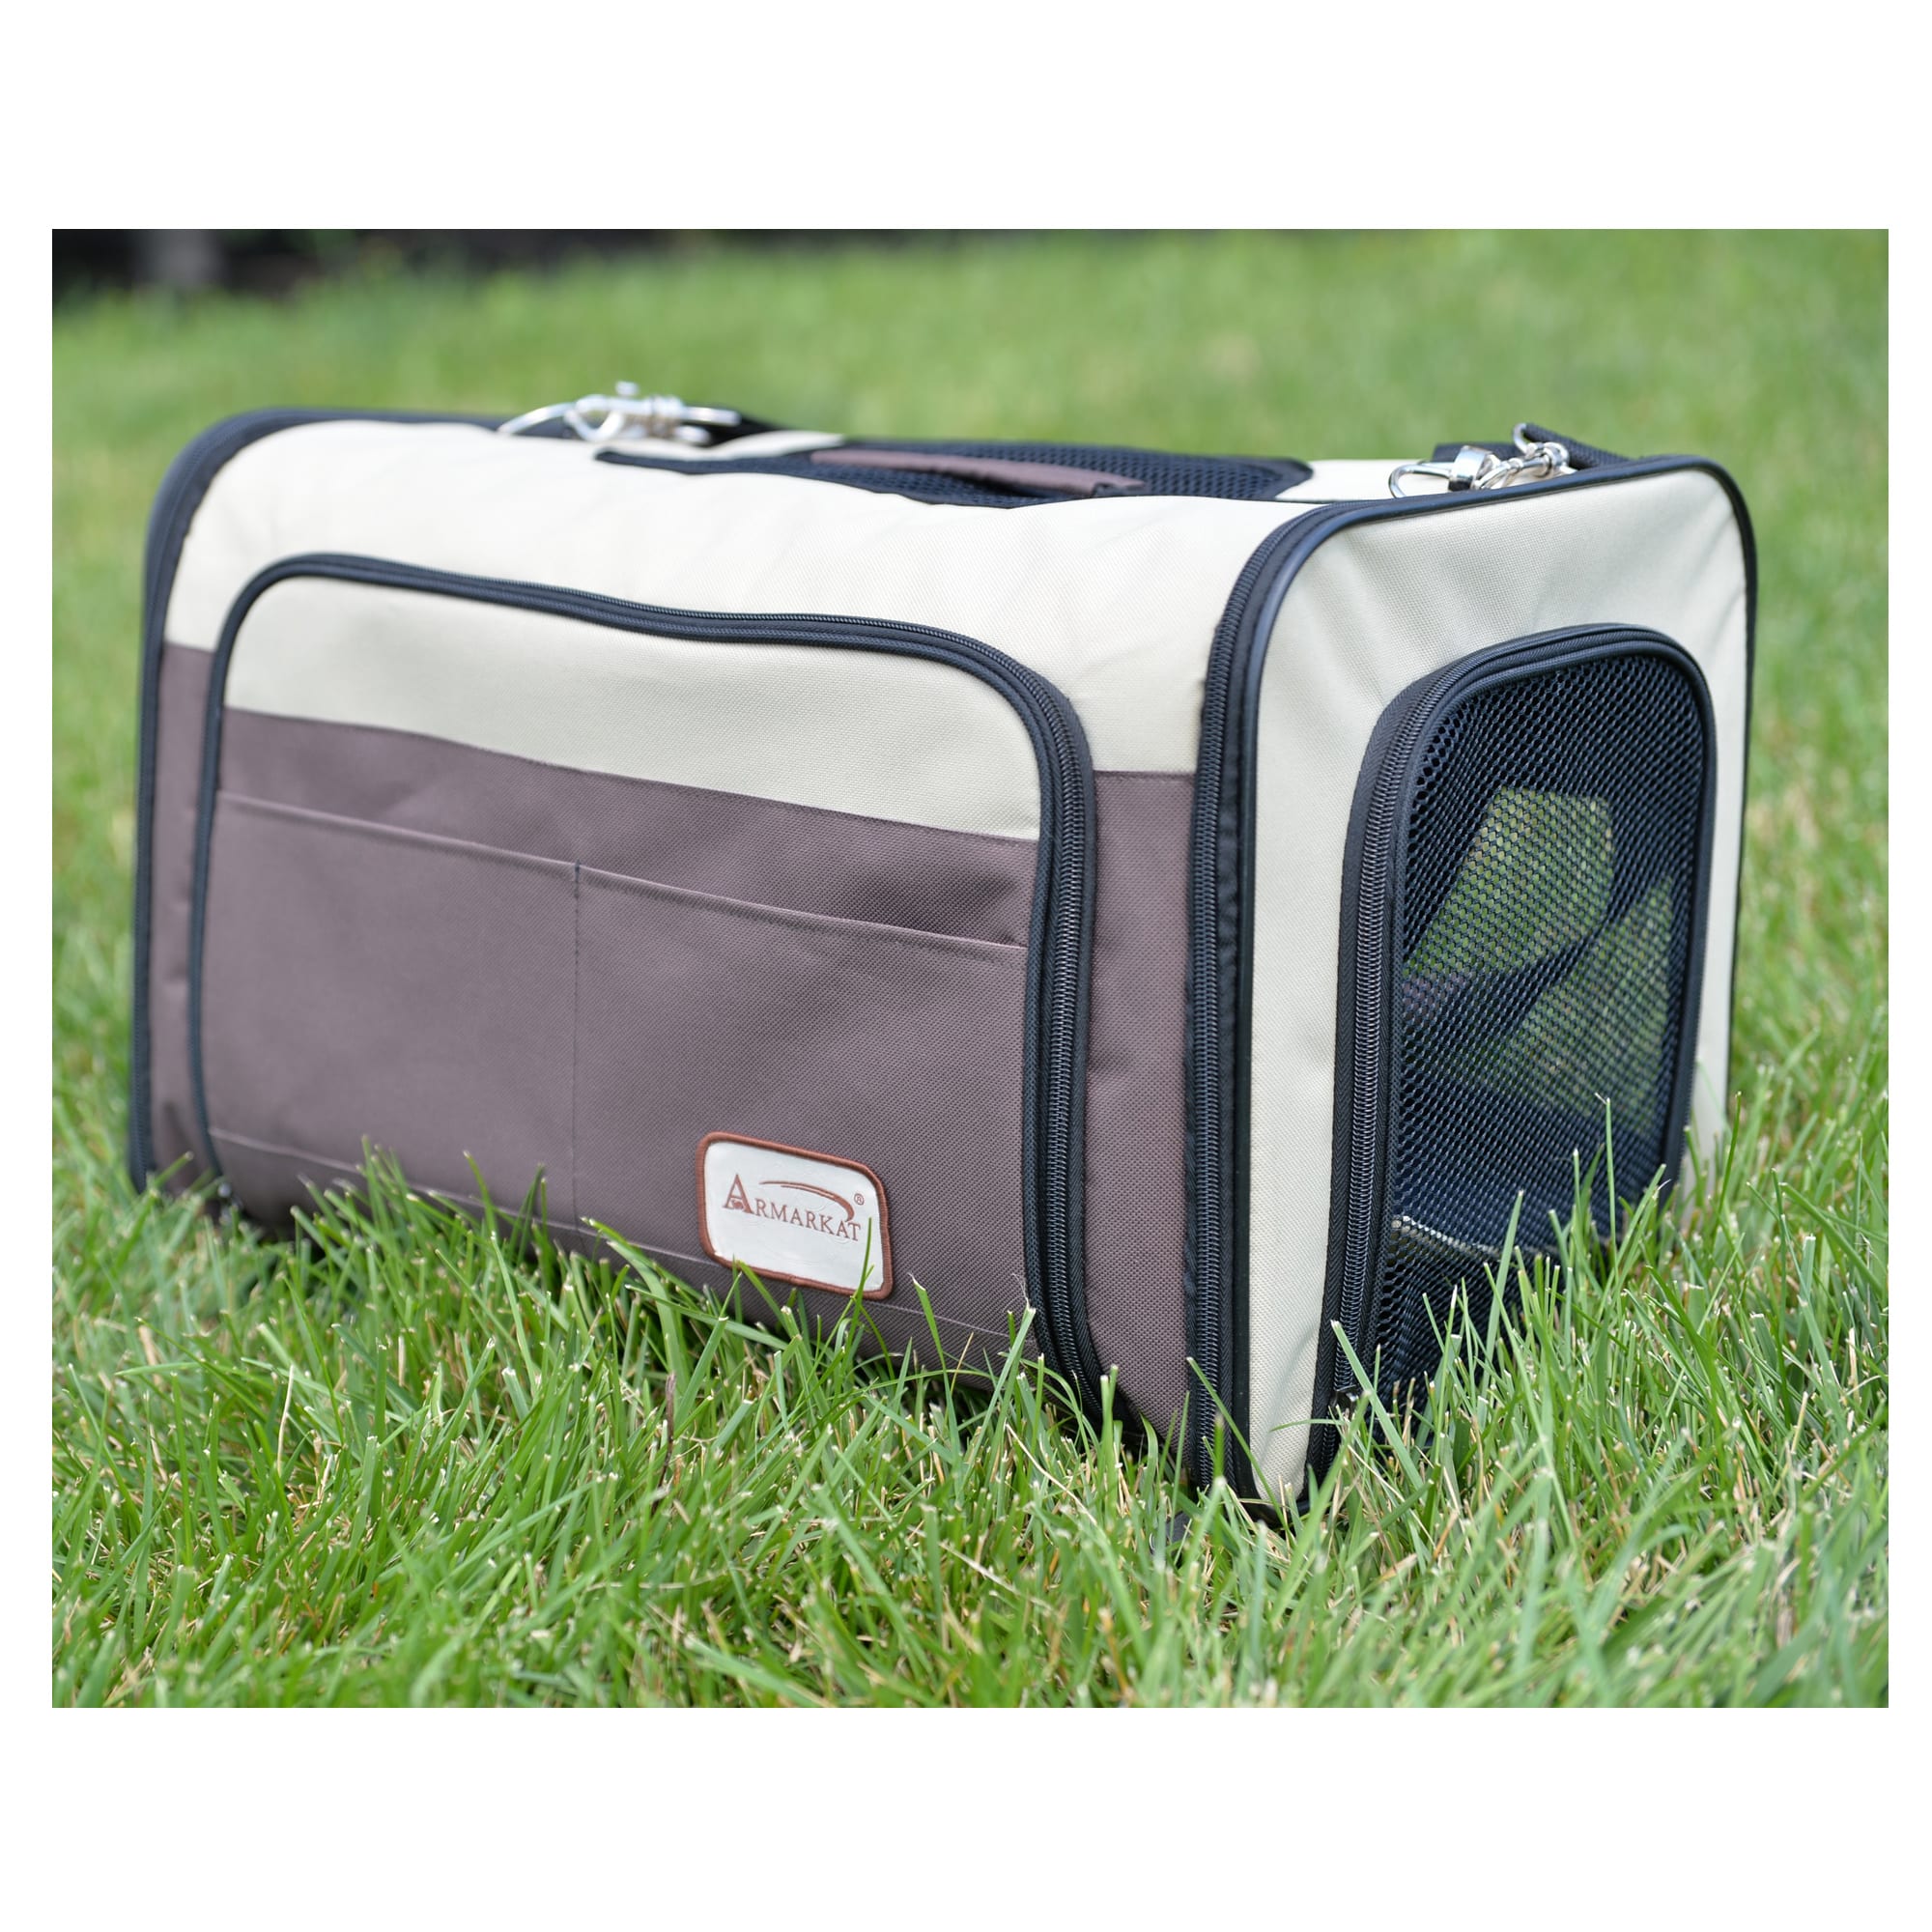 Jespet Soft-Sided Airline-Approved Travel Dog & Cat Carrier, Gray/Red, Small/Medium